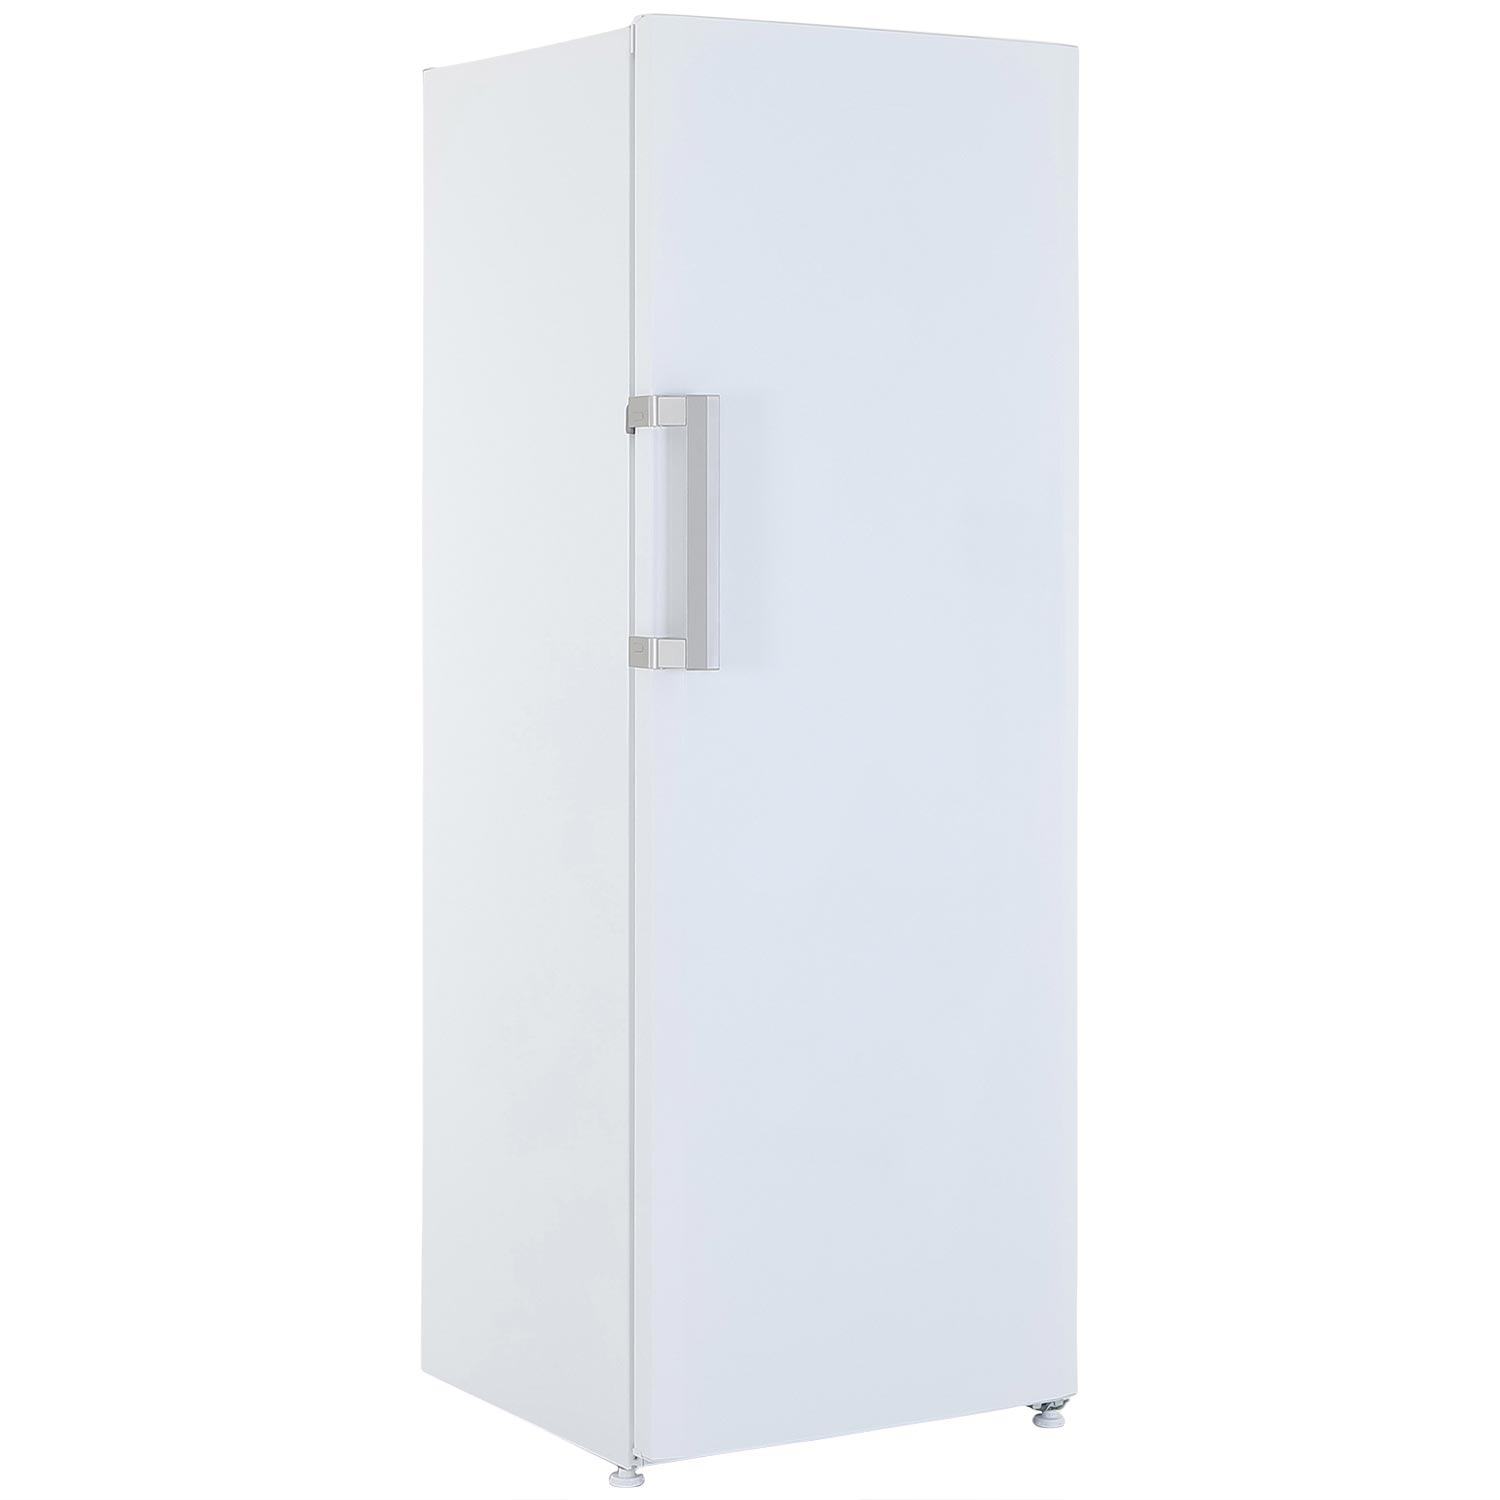 Blomberg Larder - White - A+ Energy Rated - 2